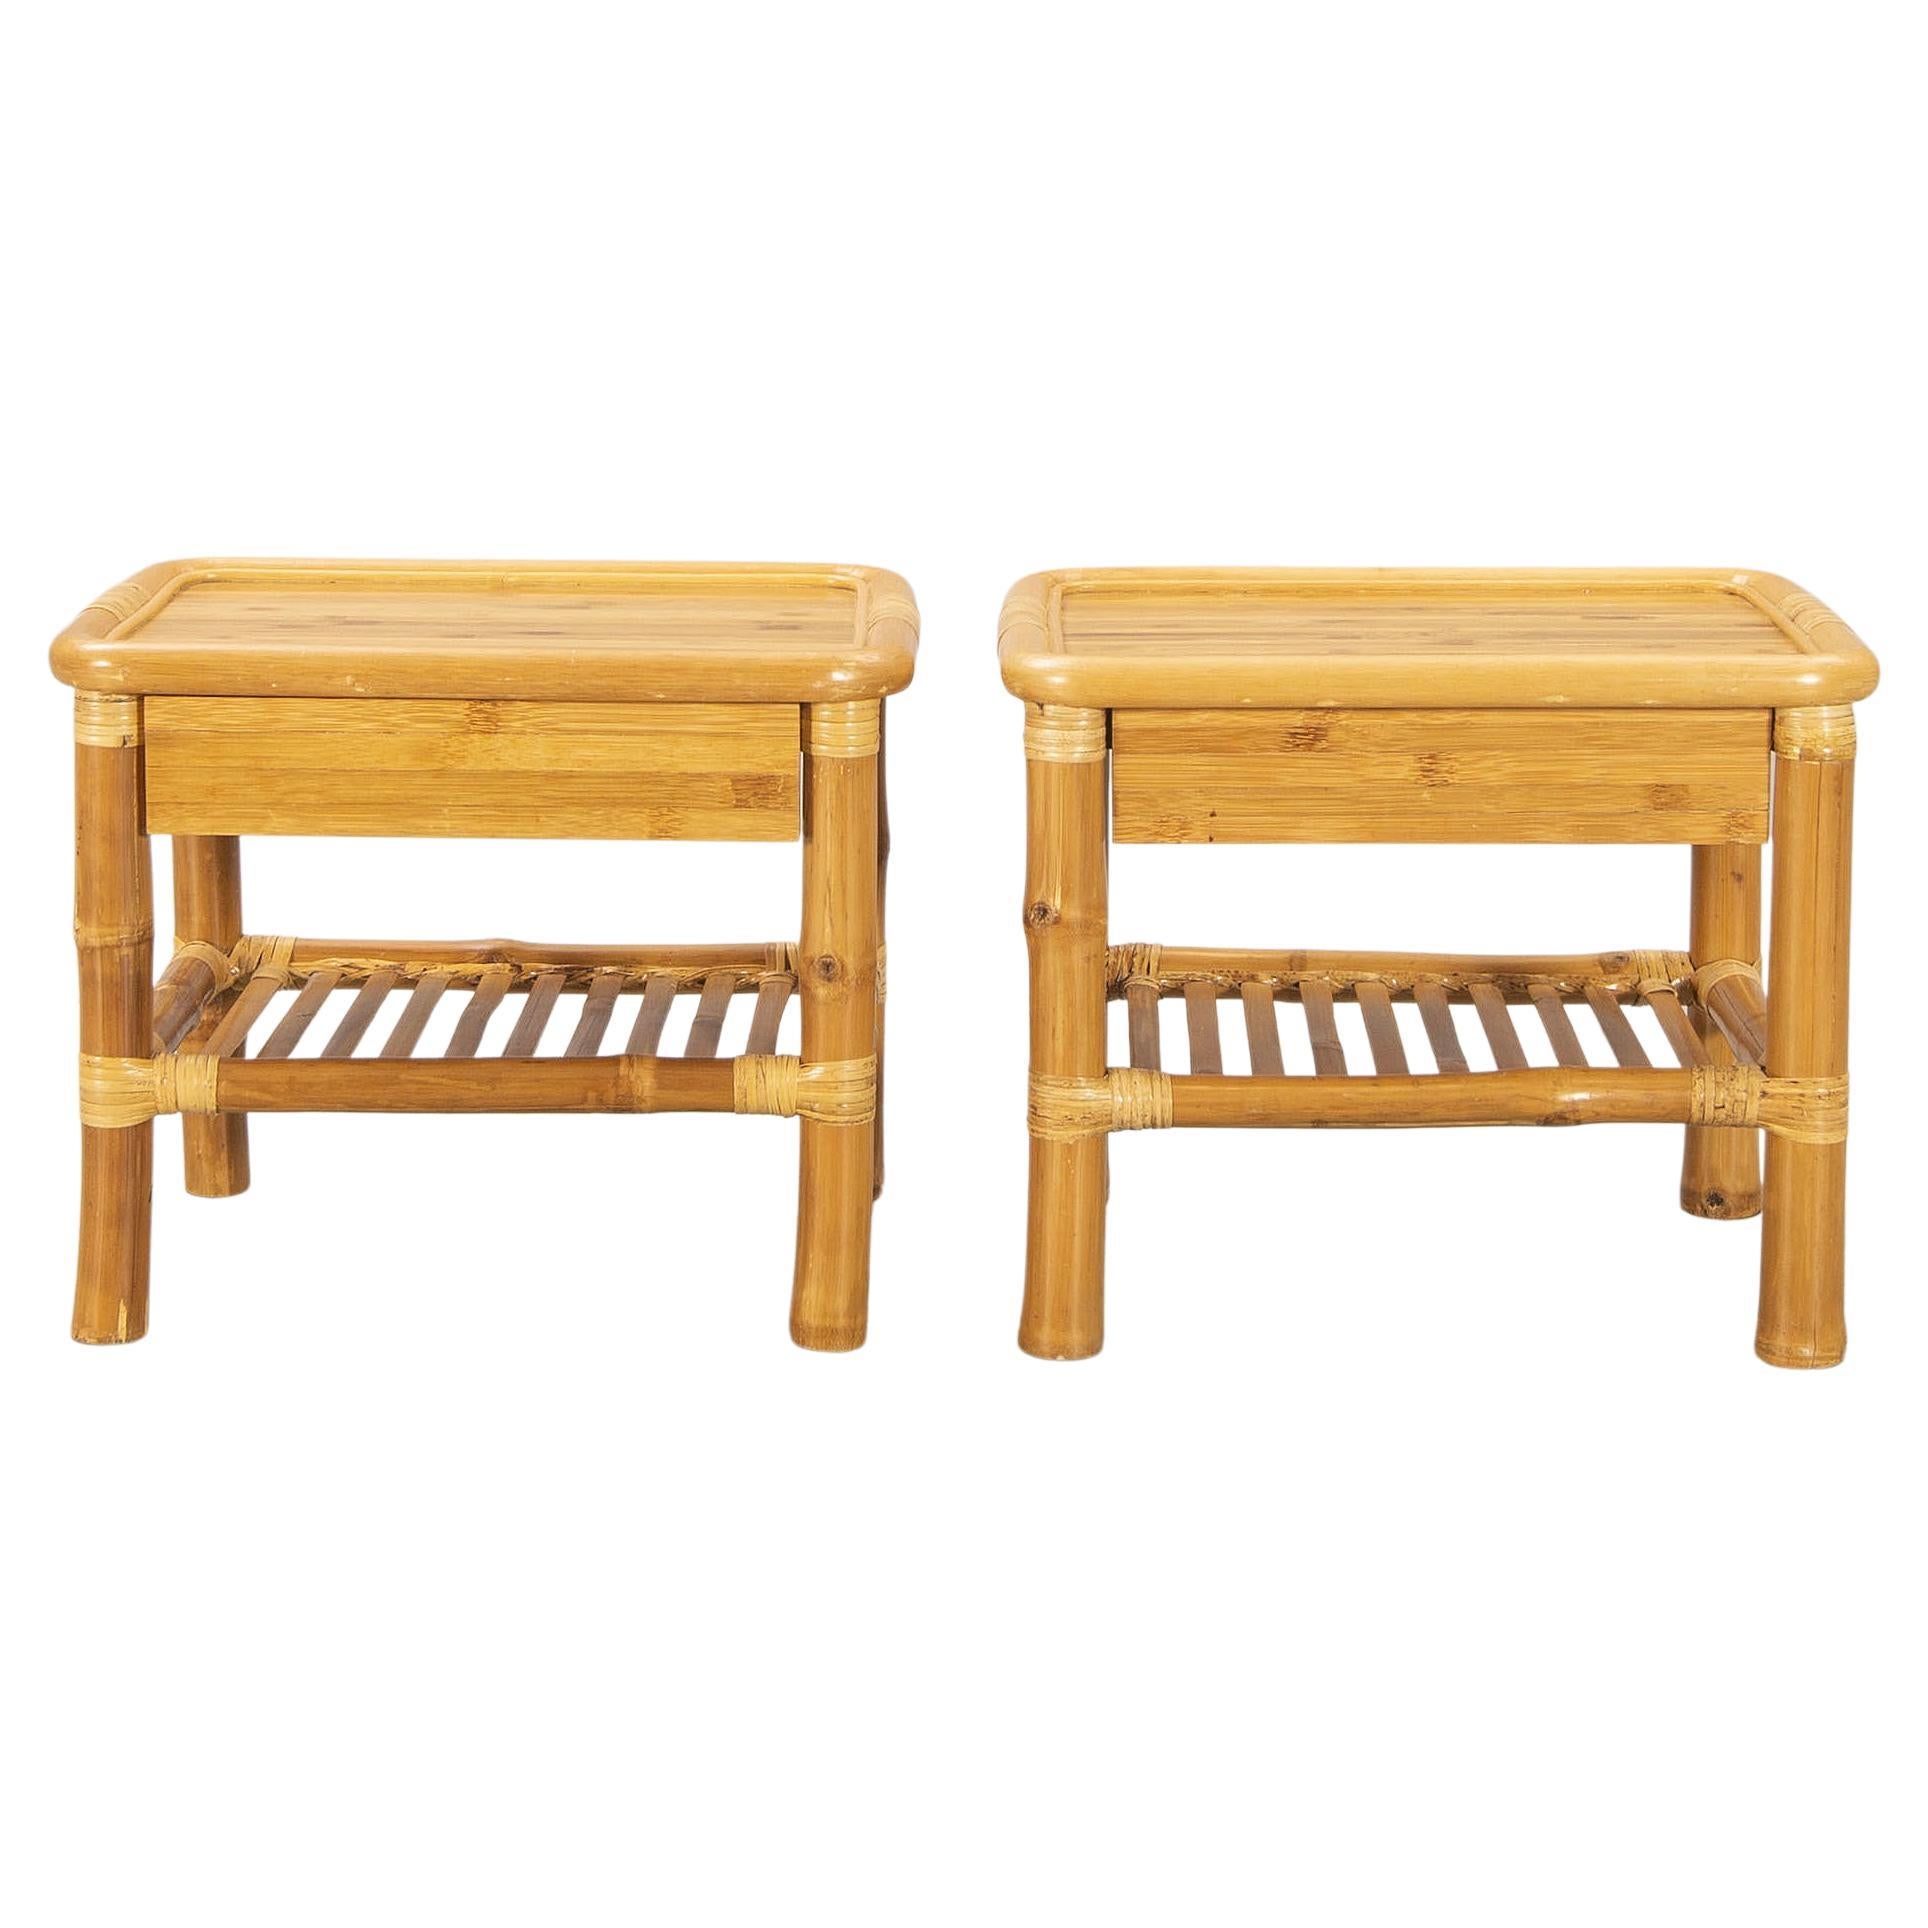 Bamboo and Wood Tables a Pair Probably by DUX, Sweden, 1960 For Sale